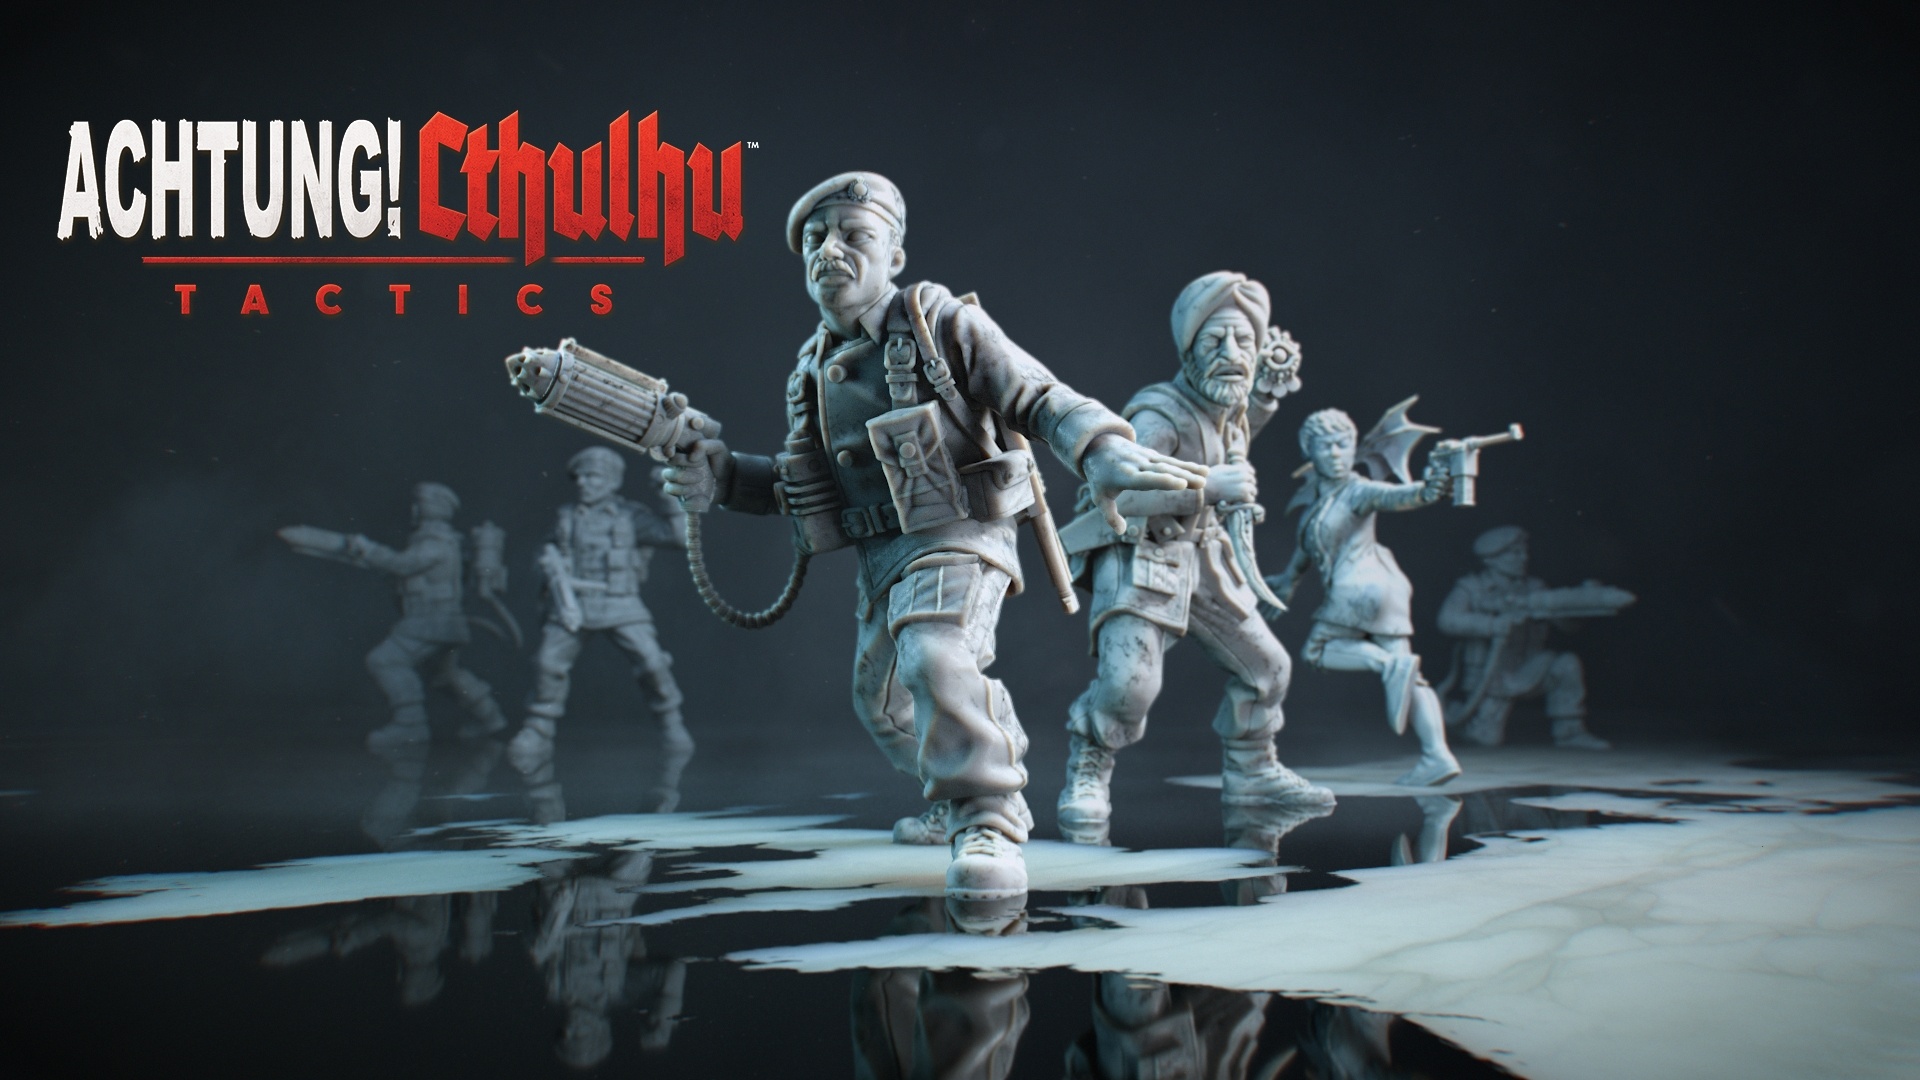 Achtung! Cthulhu Tactics Nintendo Switch Review – Lovecraftian Horror On A Tactical Scale